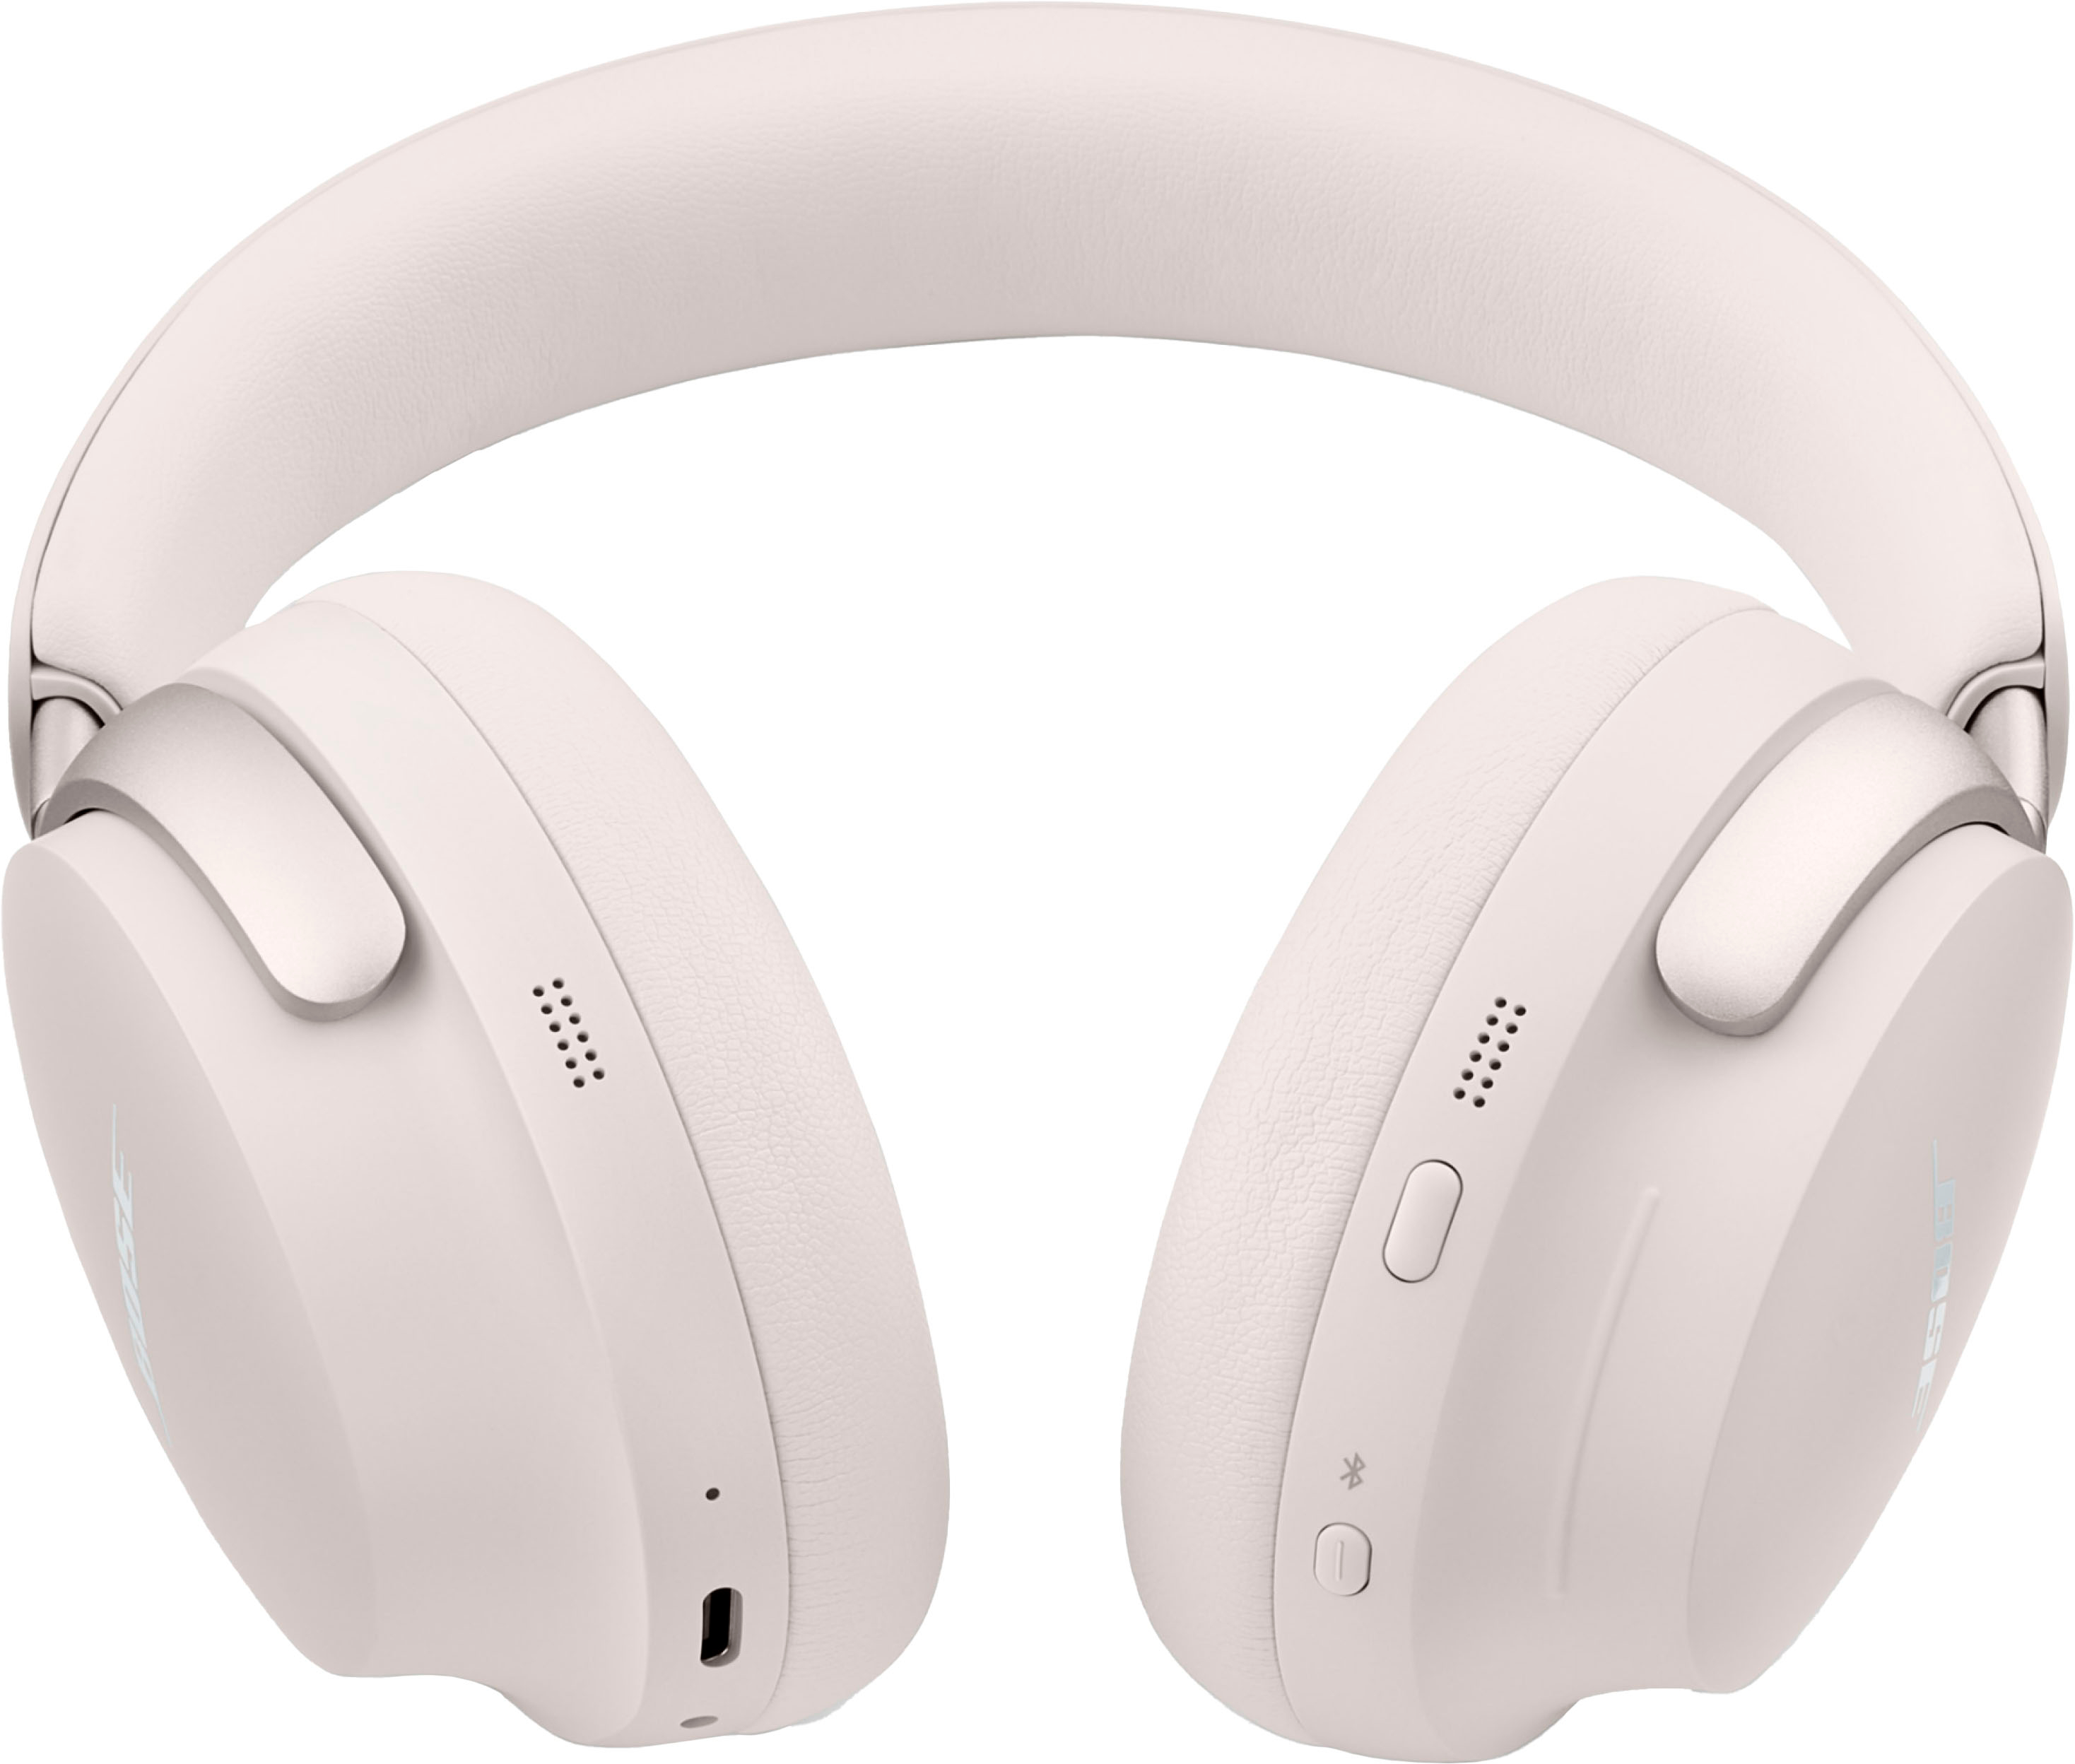 Over-the-Ear Best Headphones Noise Cancelling - Bose Smoke Ultra QuietComfort 880066-0200 Wireless White Buy